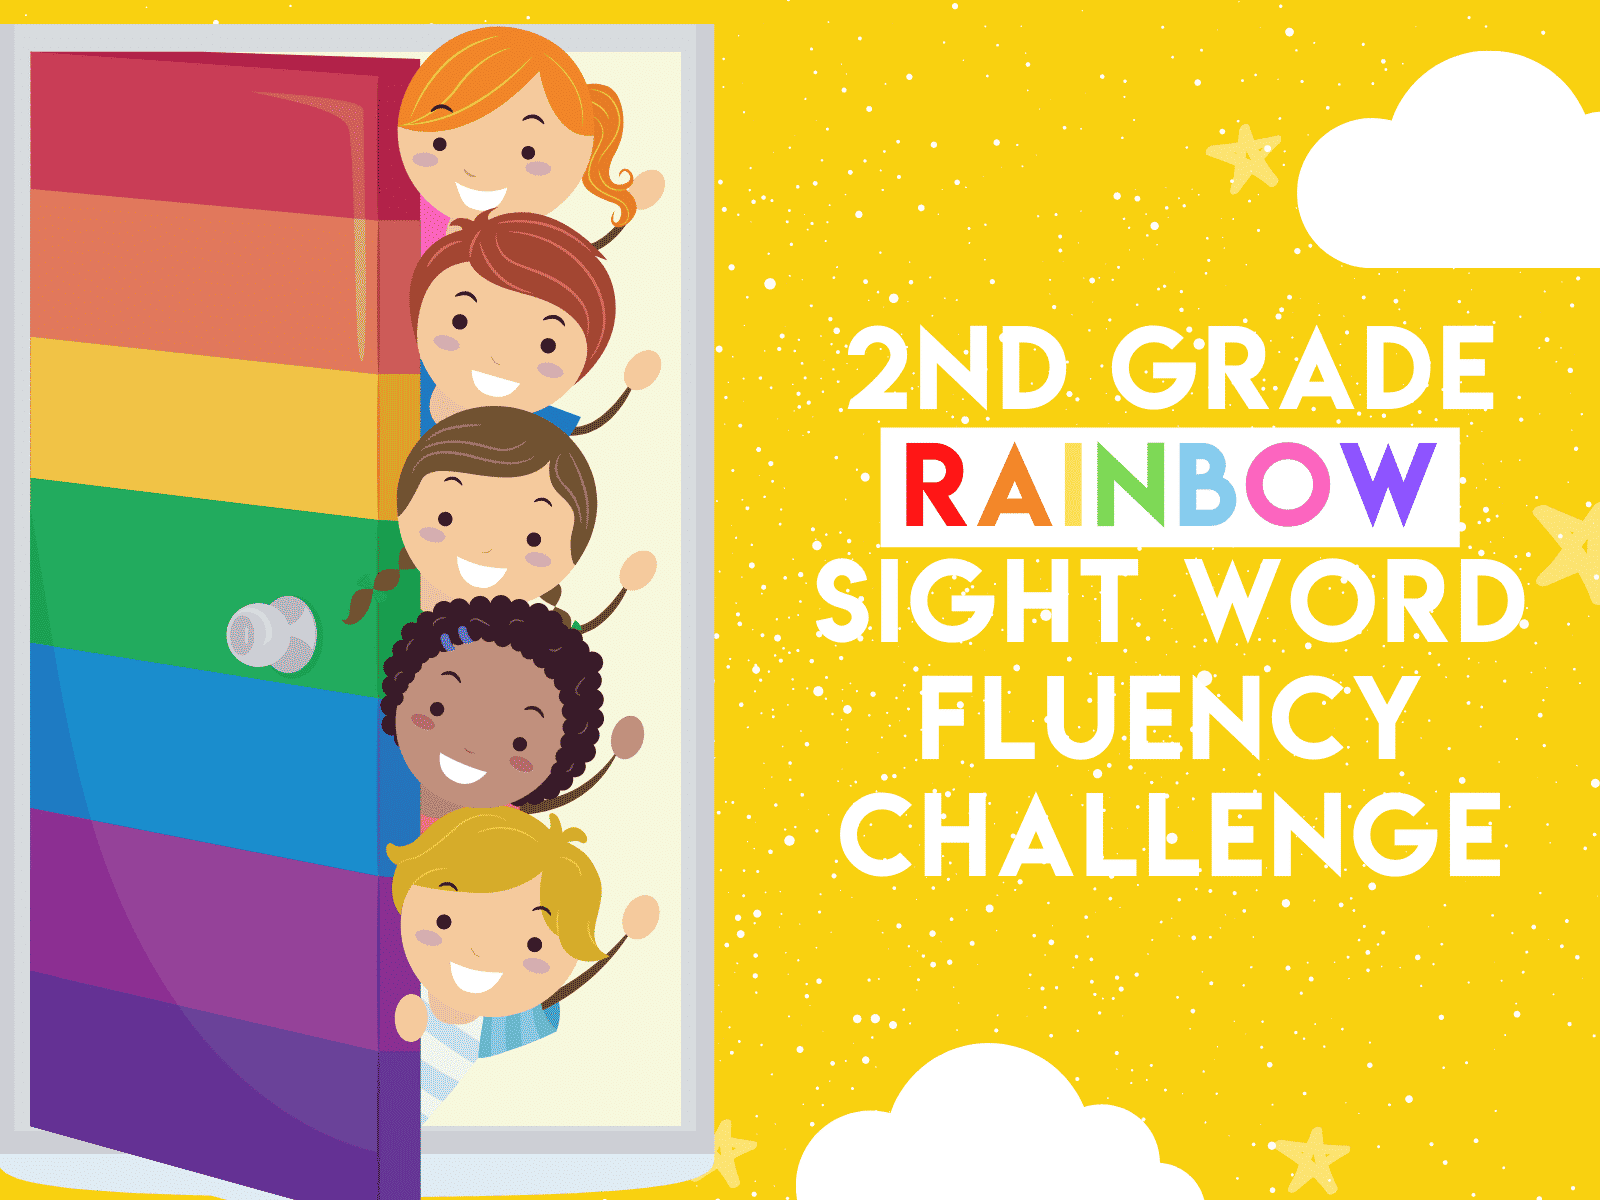 2nd Grade Rainbow Sight Word Challenge | Free Learning Resource for 2nd Grade